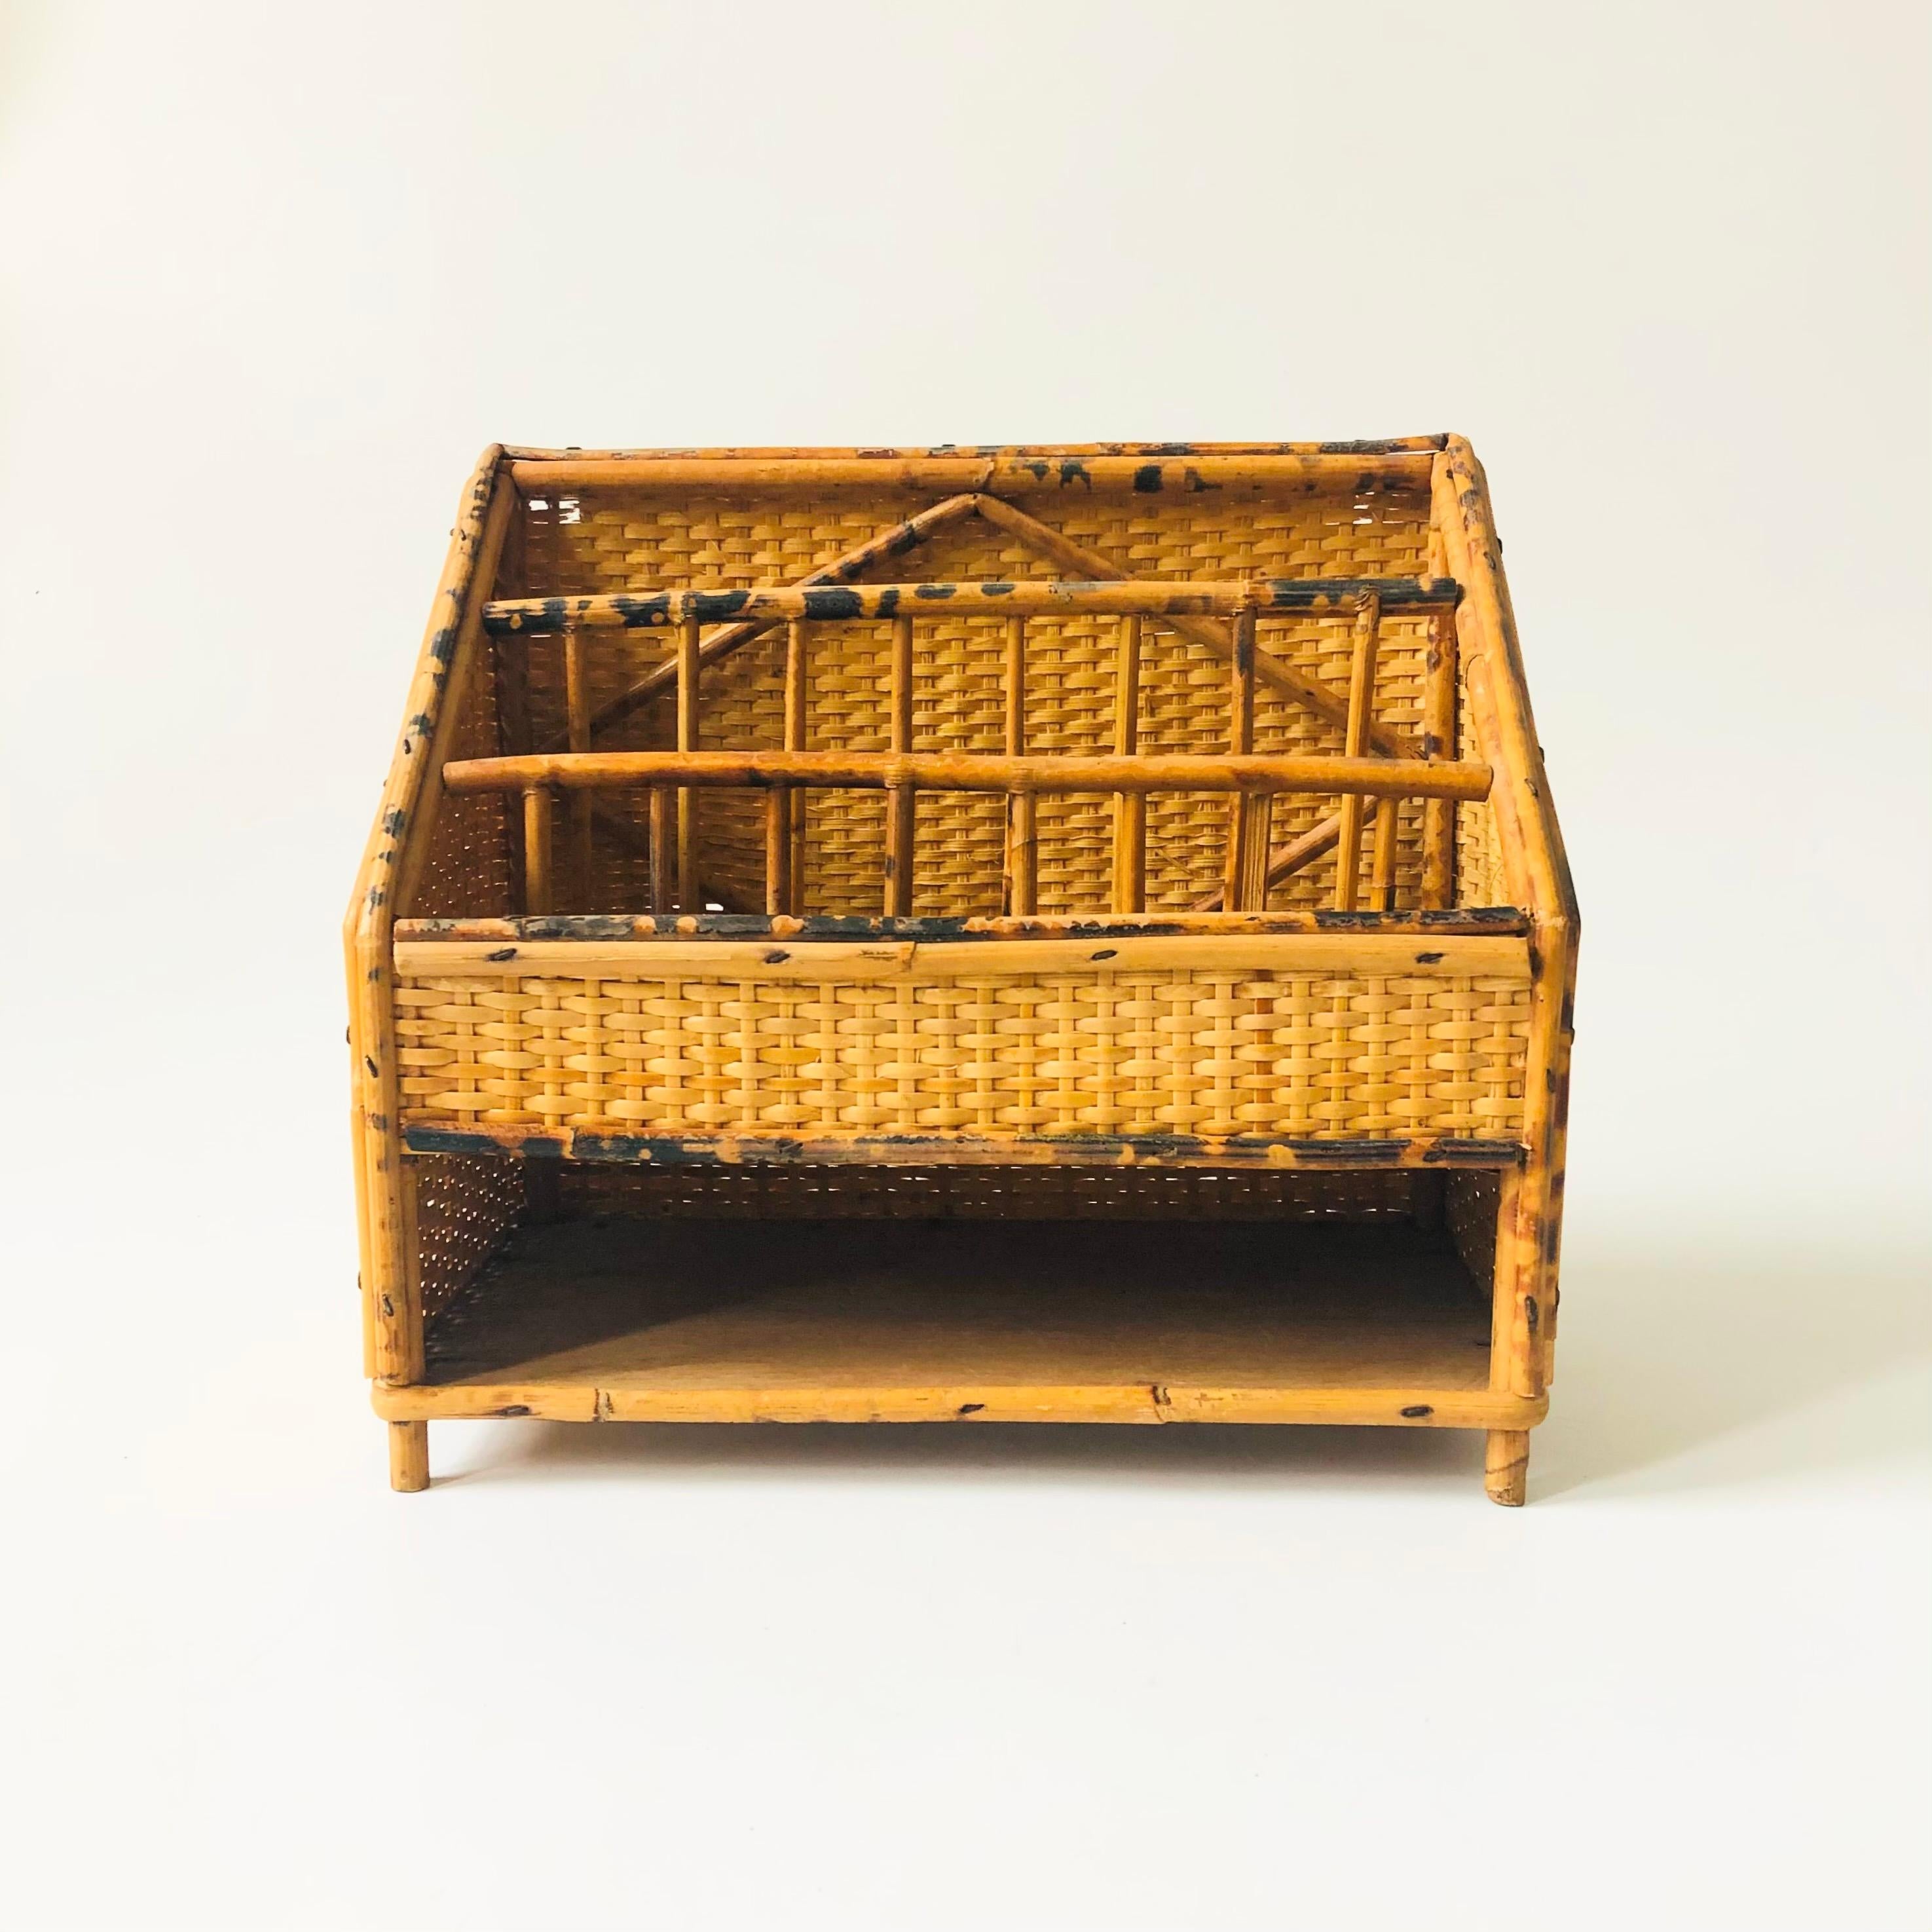 A vintage table top desk organizer. Made of bamboo and wicker. Beautiful tortoiseshell pattern to the bamboo. Features 4 divided compartments for organizing letters and office supplies.

